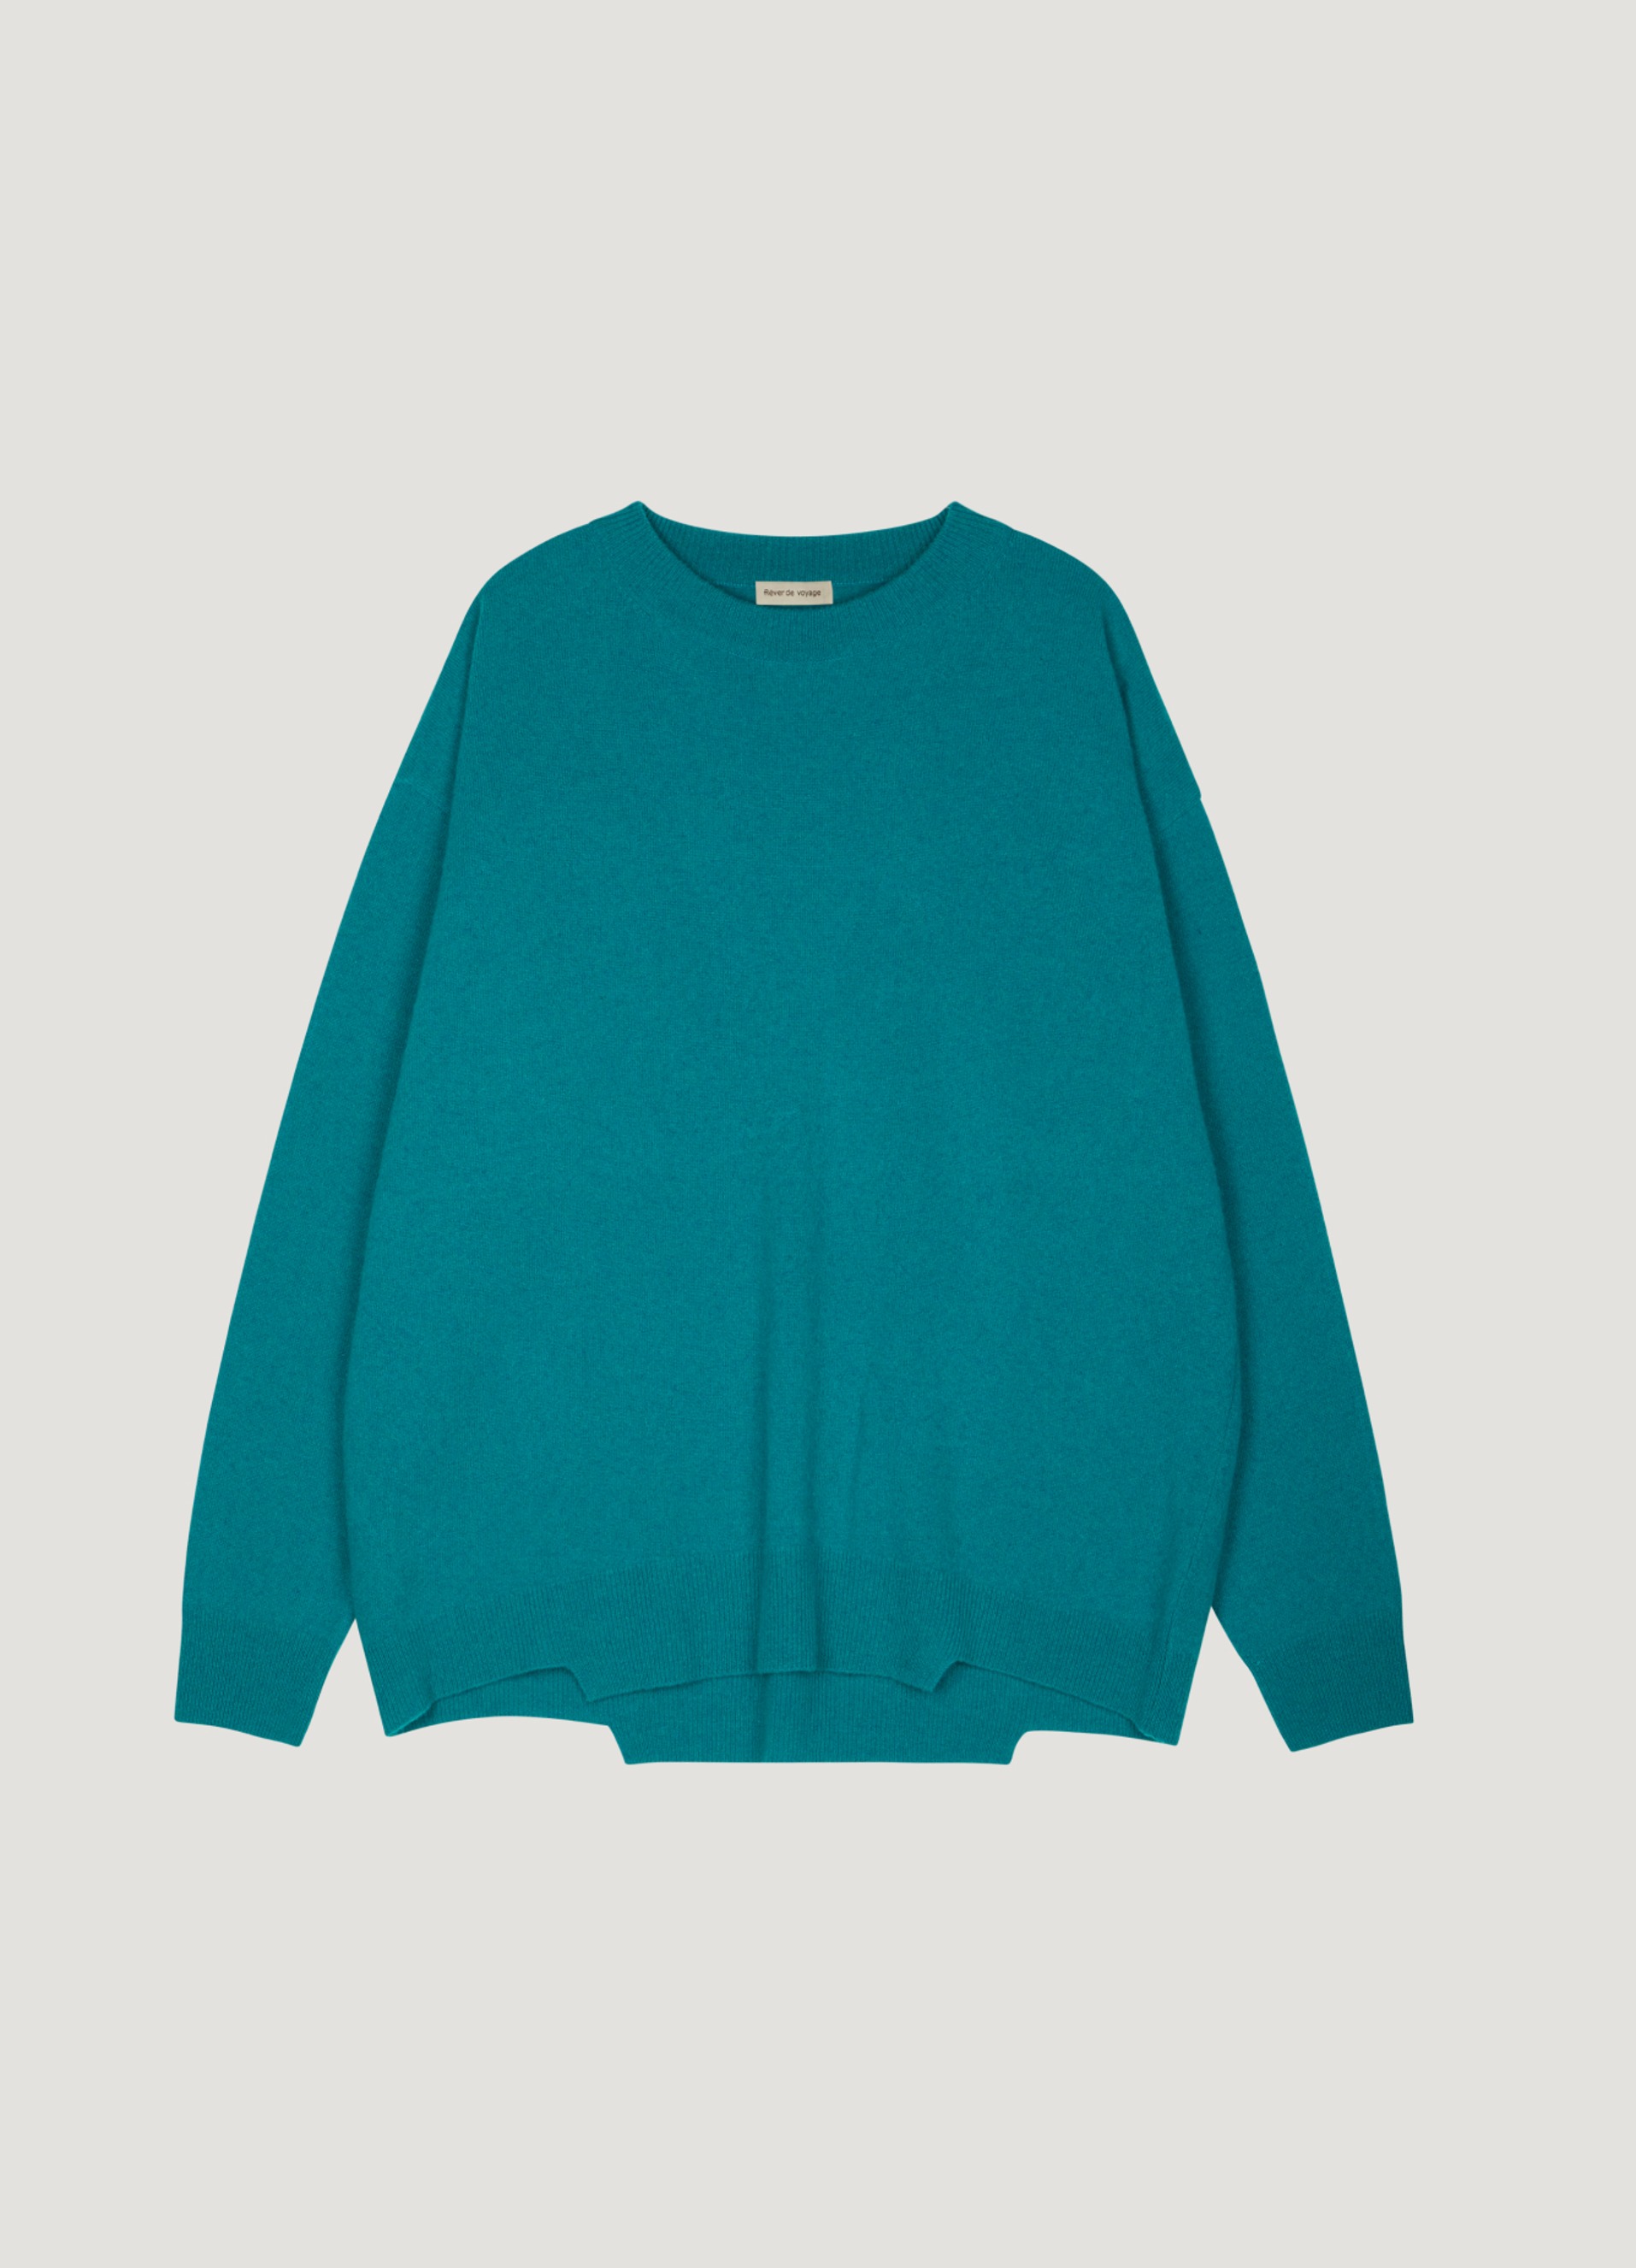 Cashmere Knit (Blue Green) out of stock